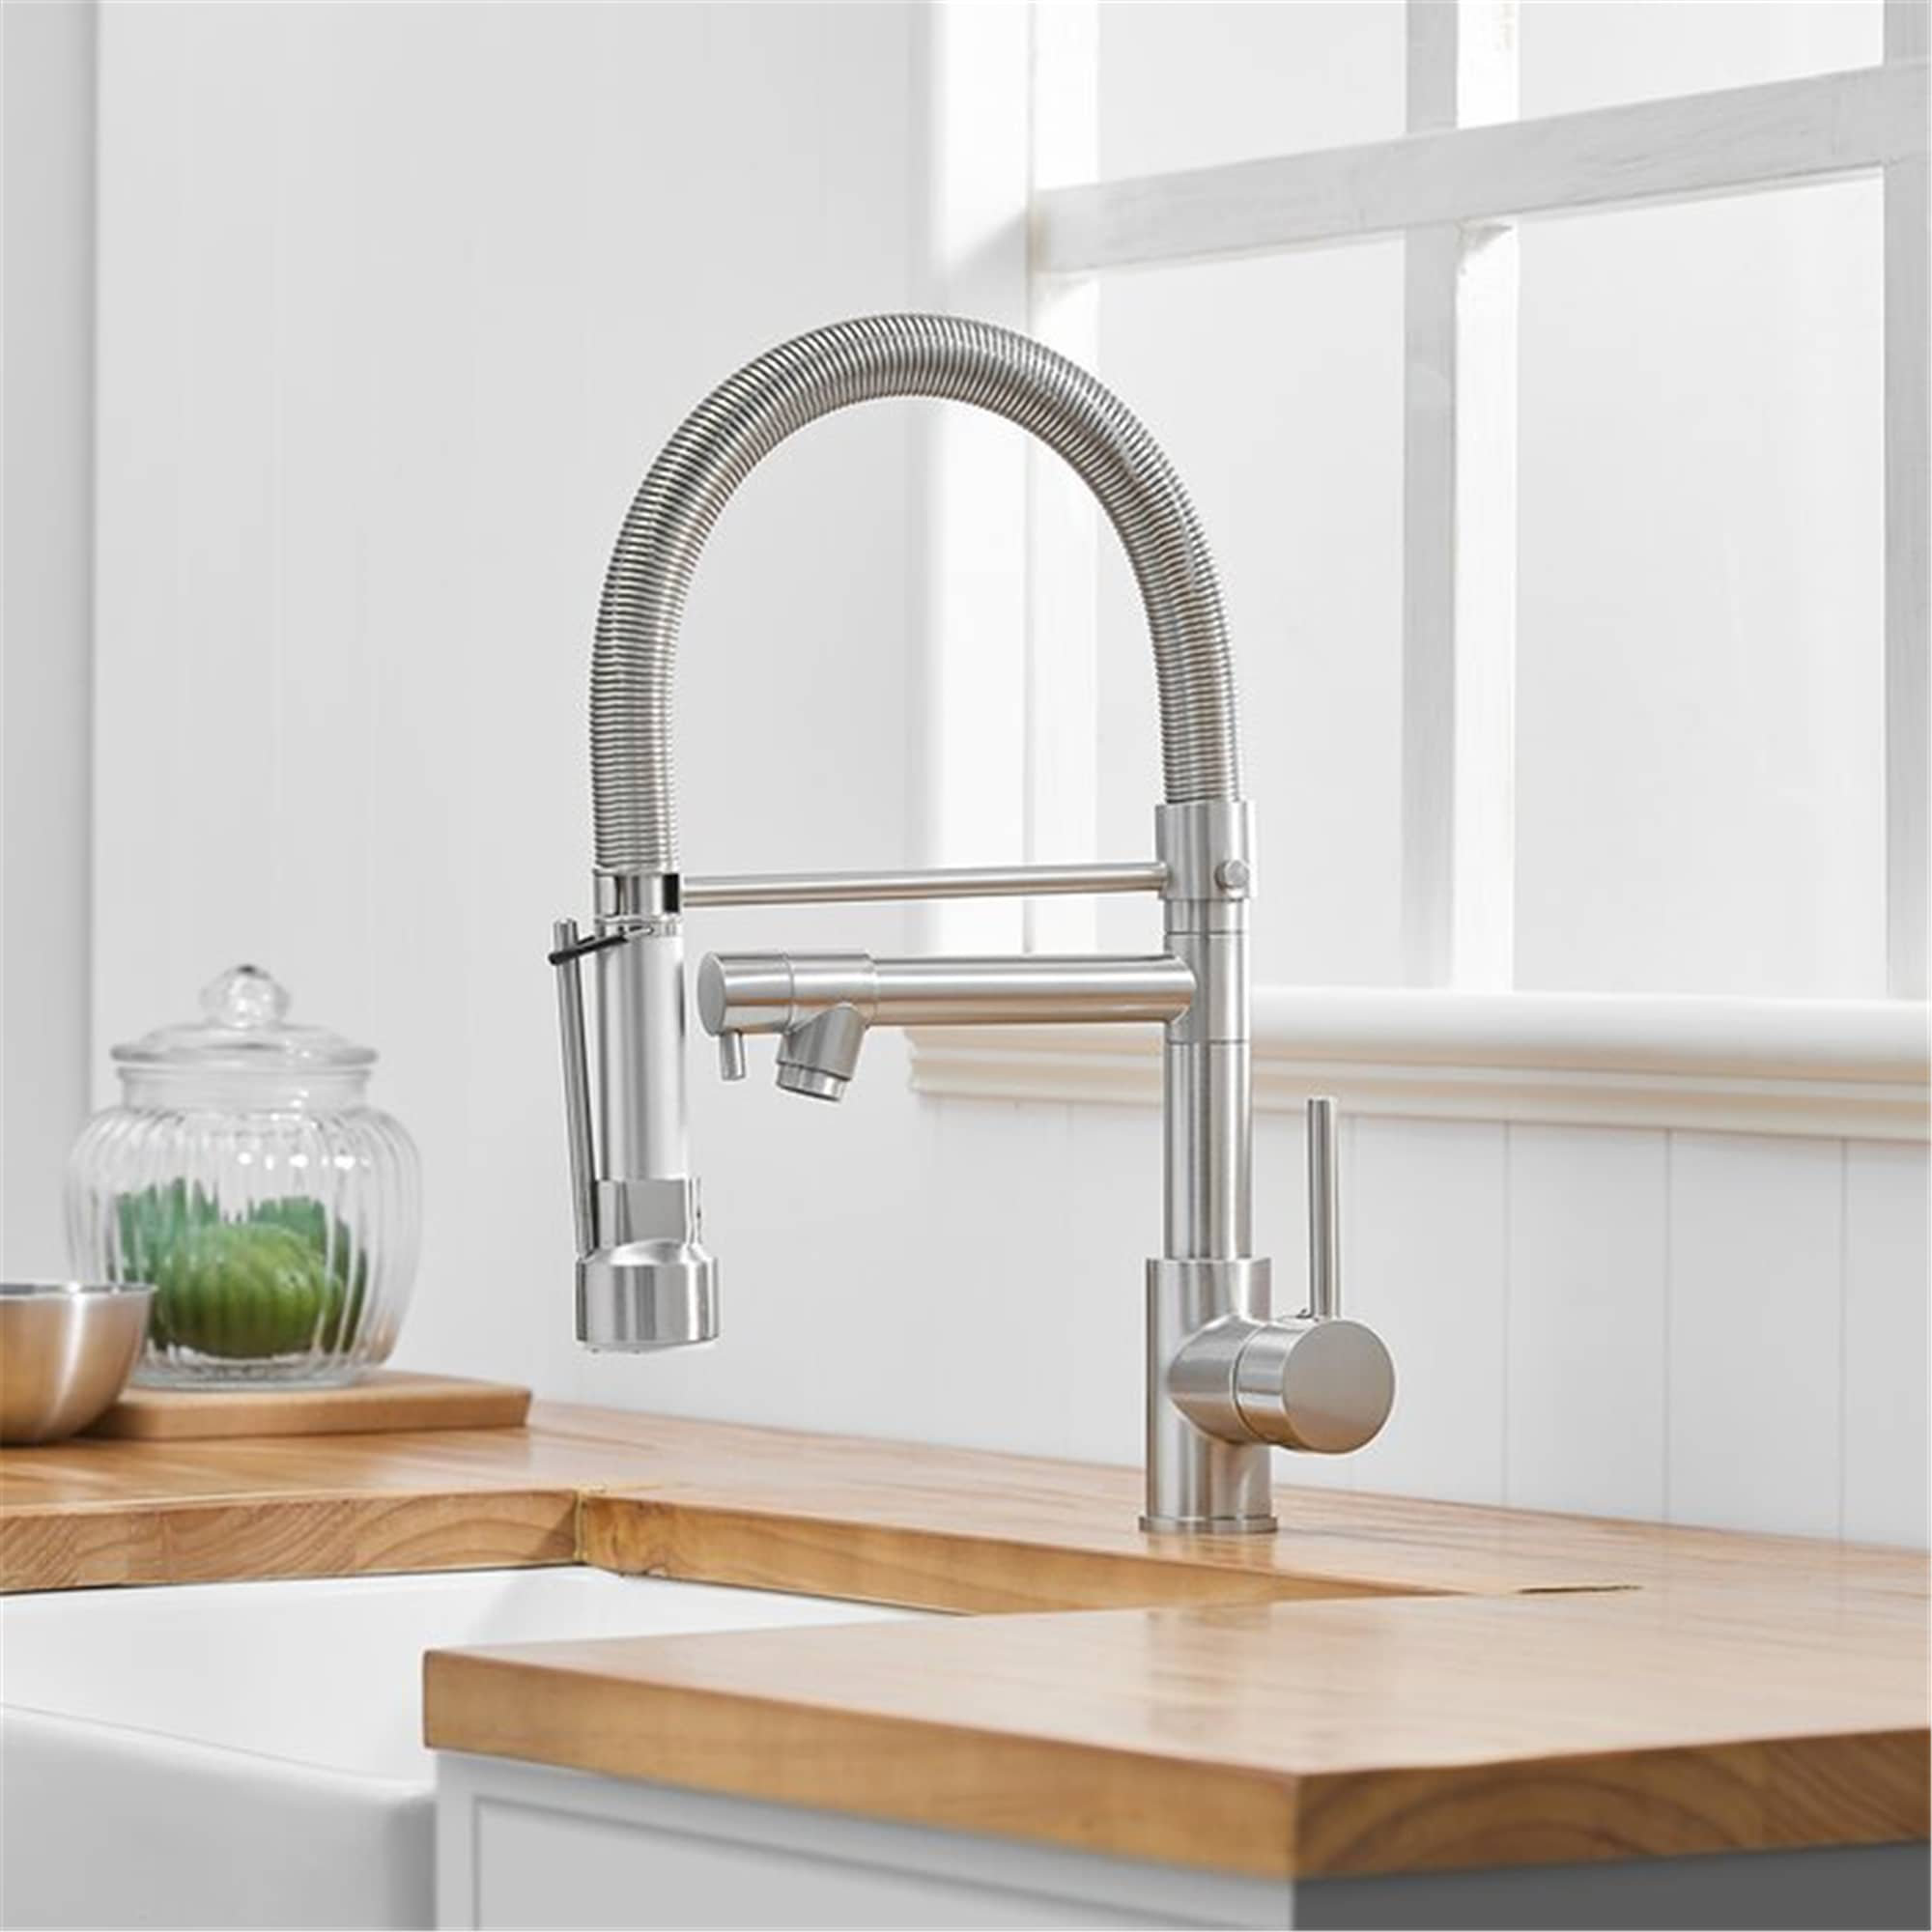 Brushed Nickel Kitchen Sink Faucet Pull out Sprayer Mixer Tap High Arc 1 Handle for sale online 